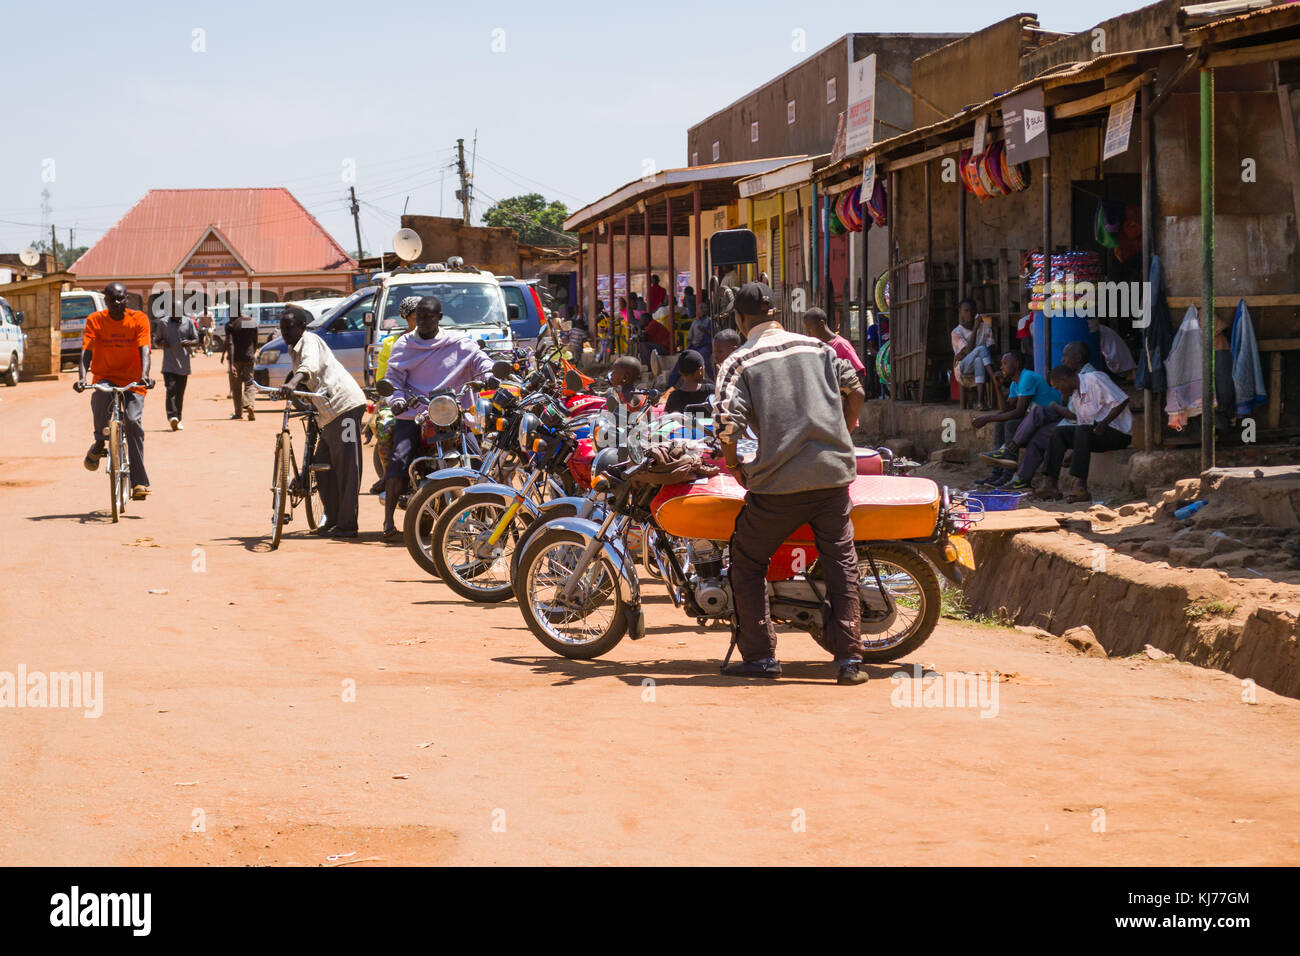 Several boda boda motorbike taxis lined up parked on a dusty road with people walking around in a town, Busia, Uganda, East Africa Stock Photo